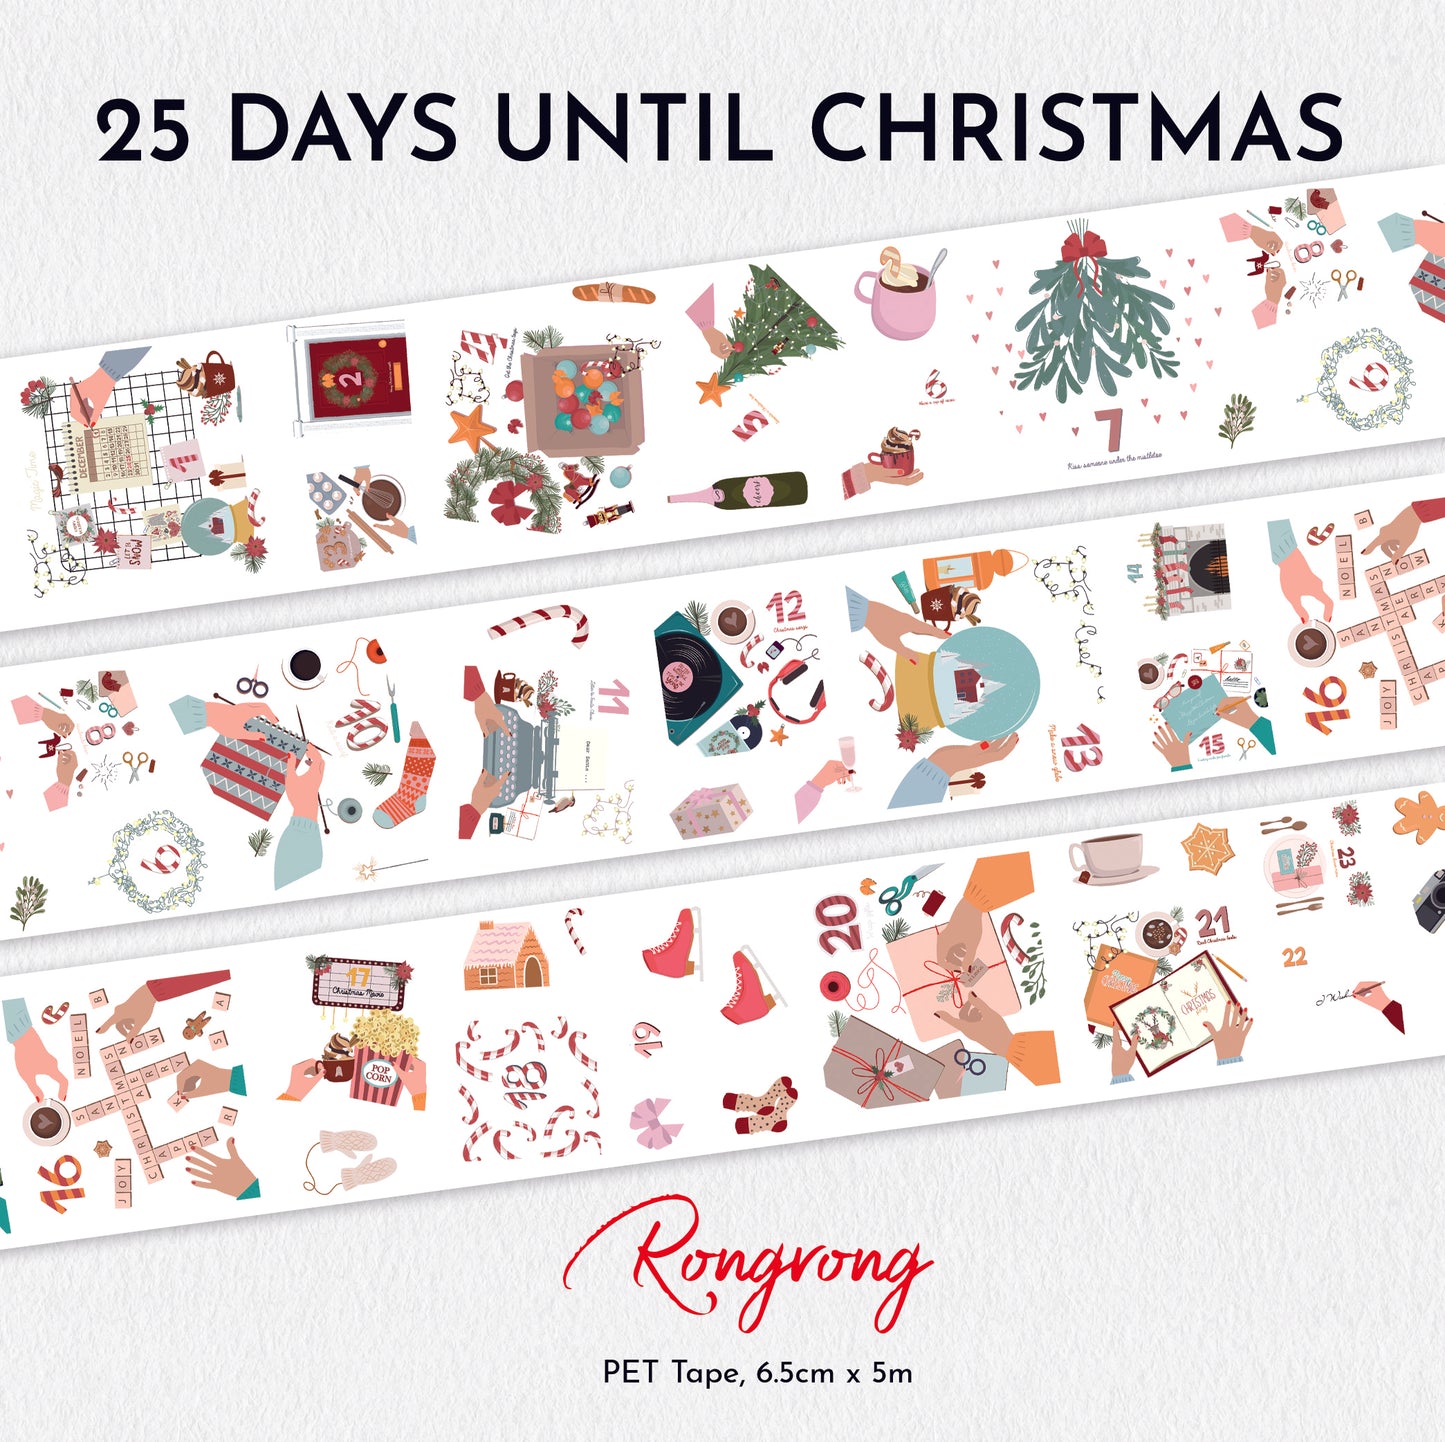 25 Days Until Christmas PET Tape (updated version 2.0) (Set of 6)